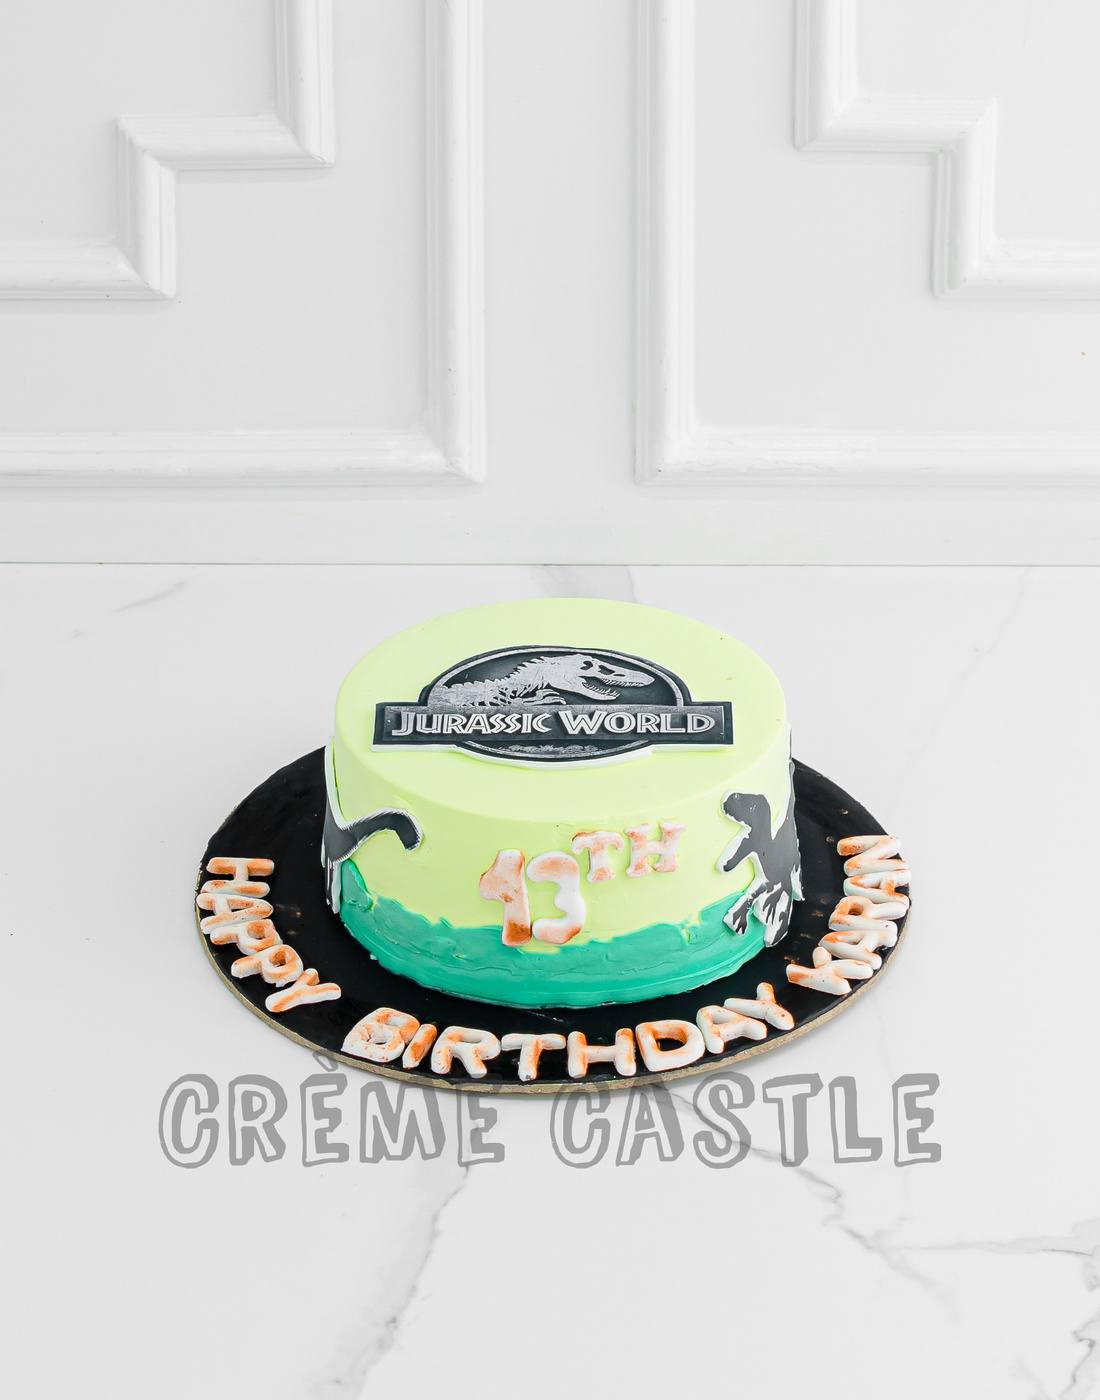 Jurassic World Dominion Dinosaurs Rule the Earth T-Rex Edible Cake Topper  Image ABPID55530 - Walmart.com